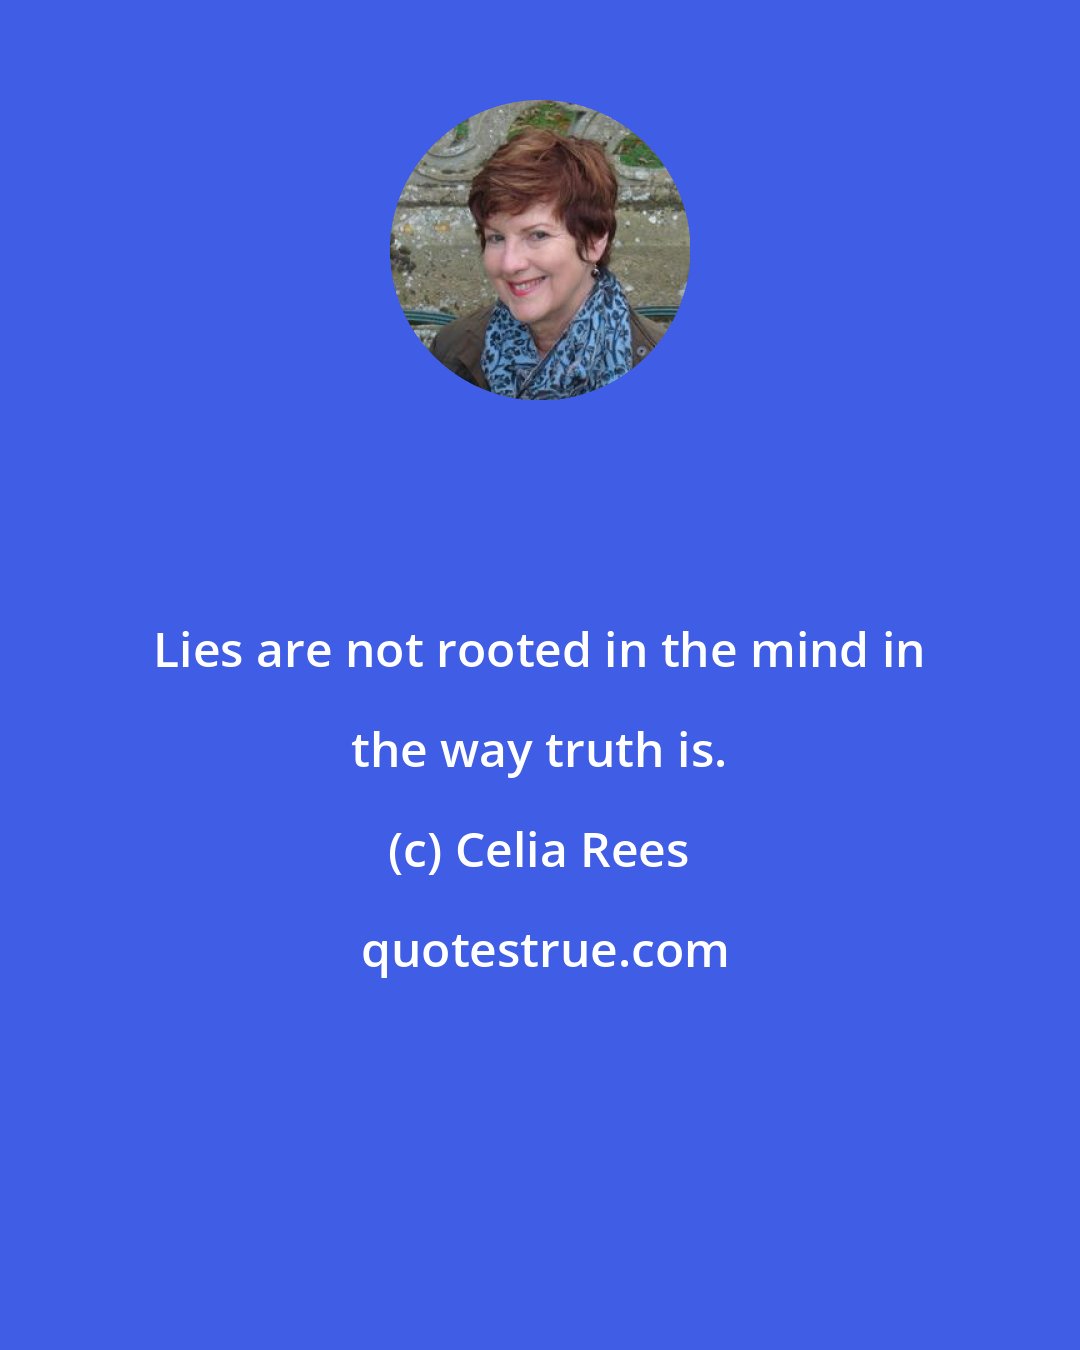 Celia Rees: Lies are not rooted in the mind in the way truth is.